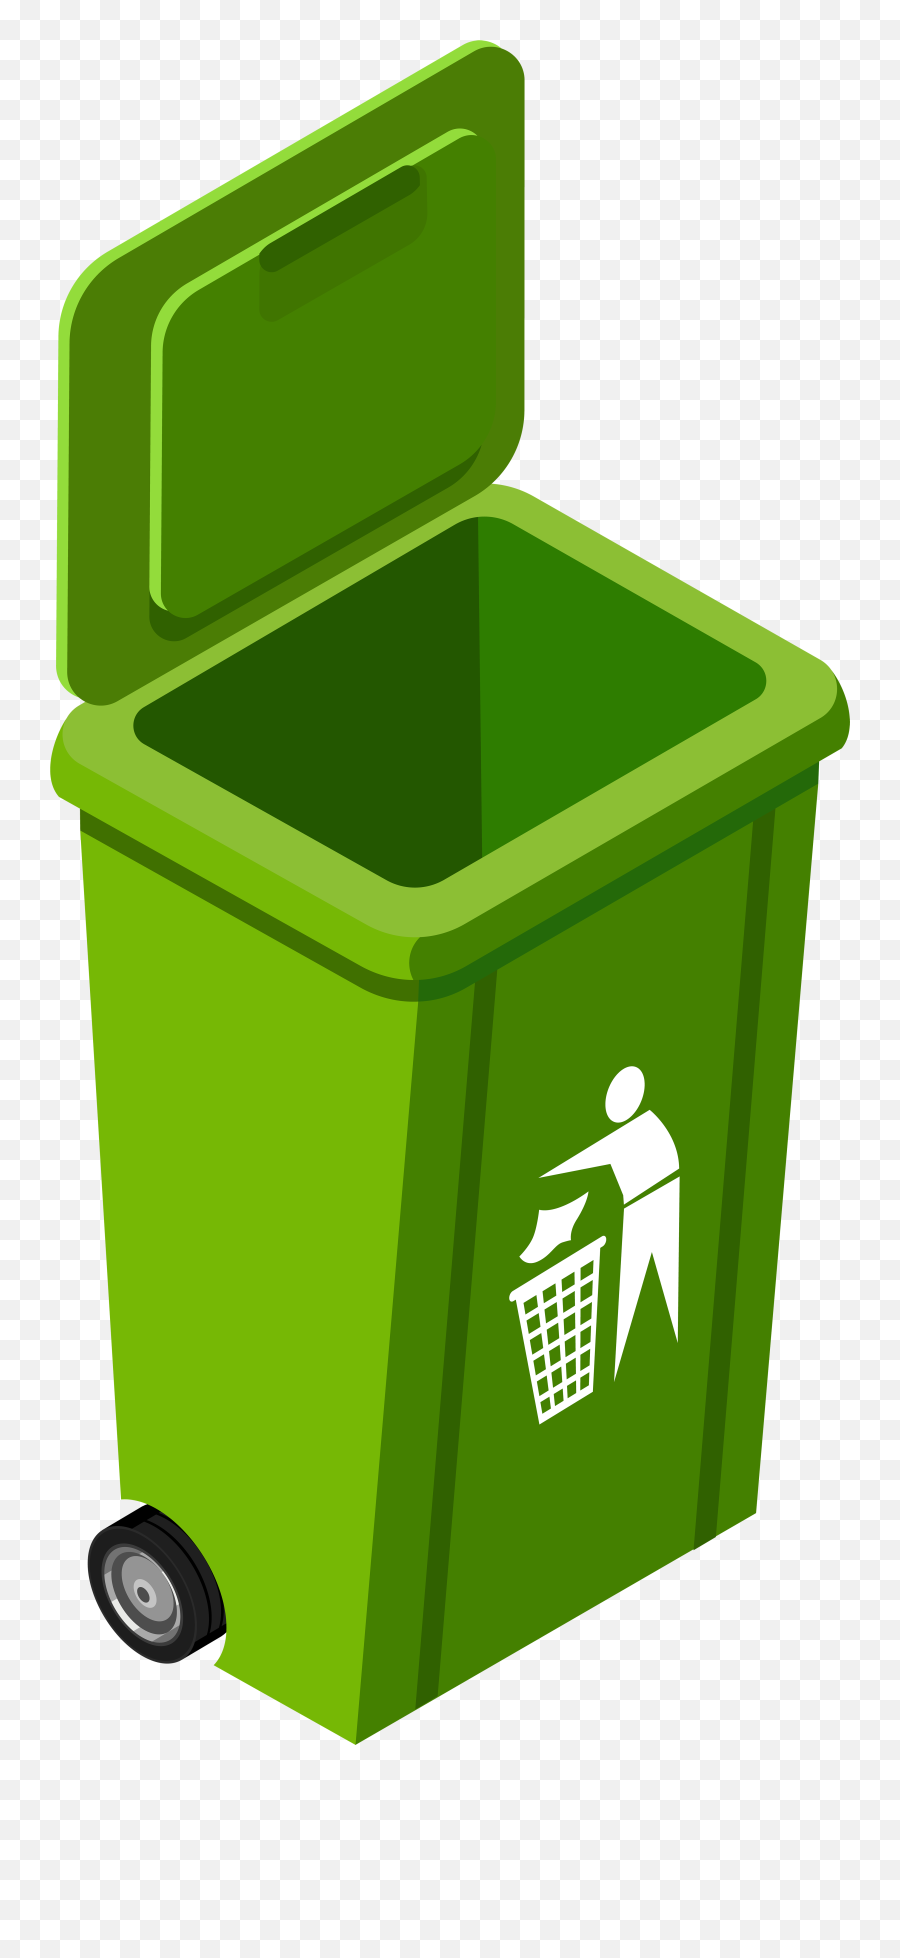 Free Garbage Can Clipart Download Free Clip Art Free Clip - Trash Bin Png Clipart Emoji,Garbage Truck Emoji